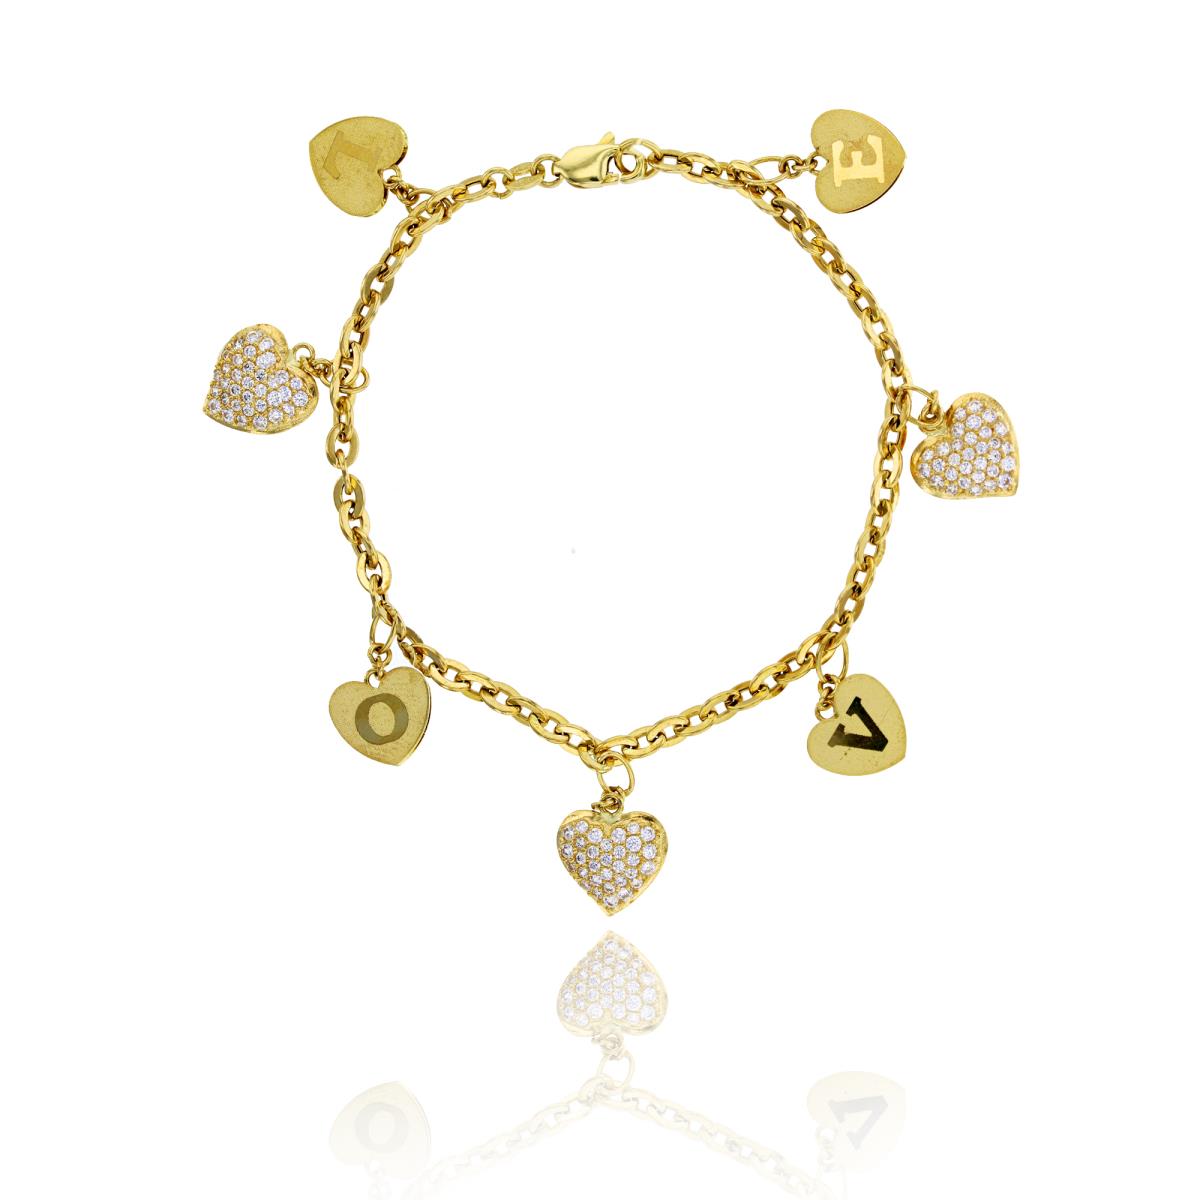 14K Yellow Gold LOVE Heart Charm 7.25" Bracelet with Cubic Zirconia